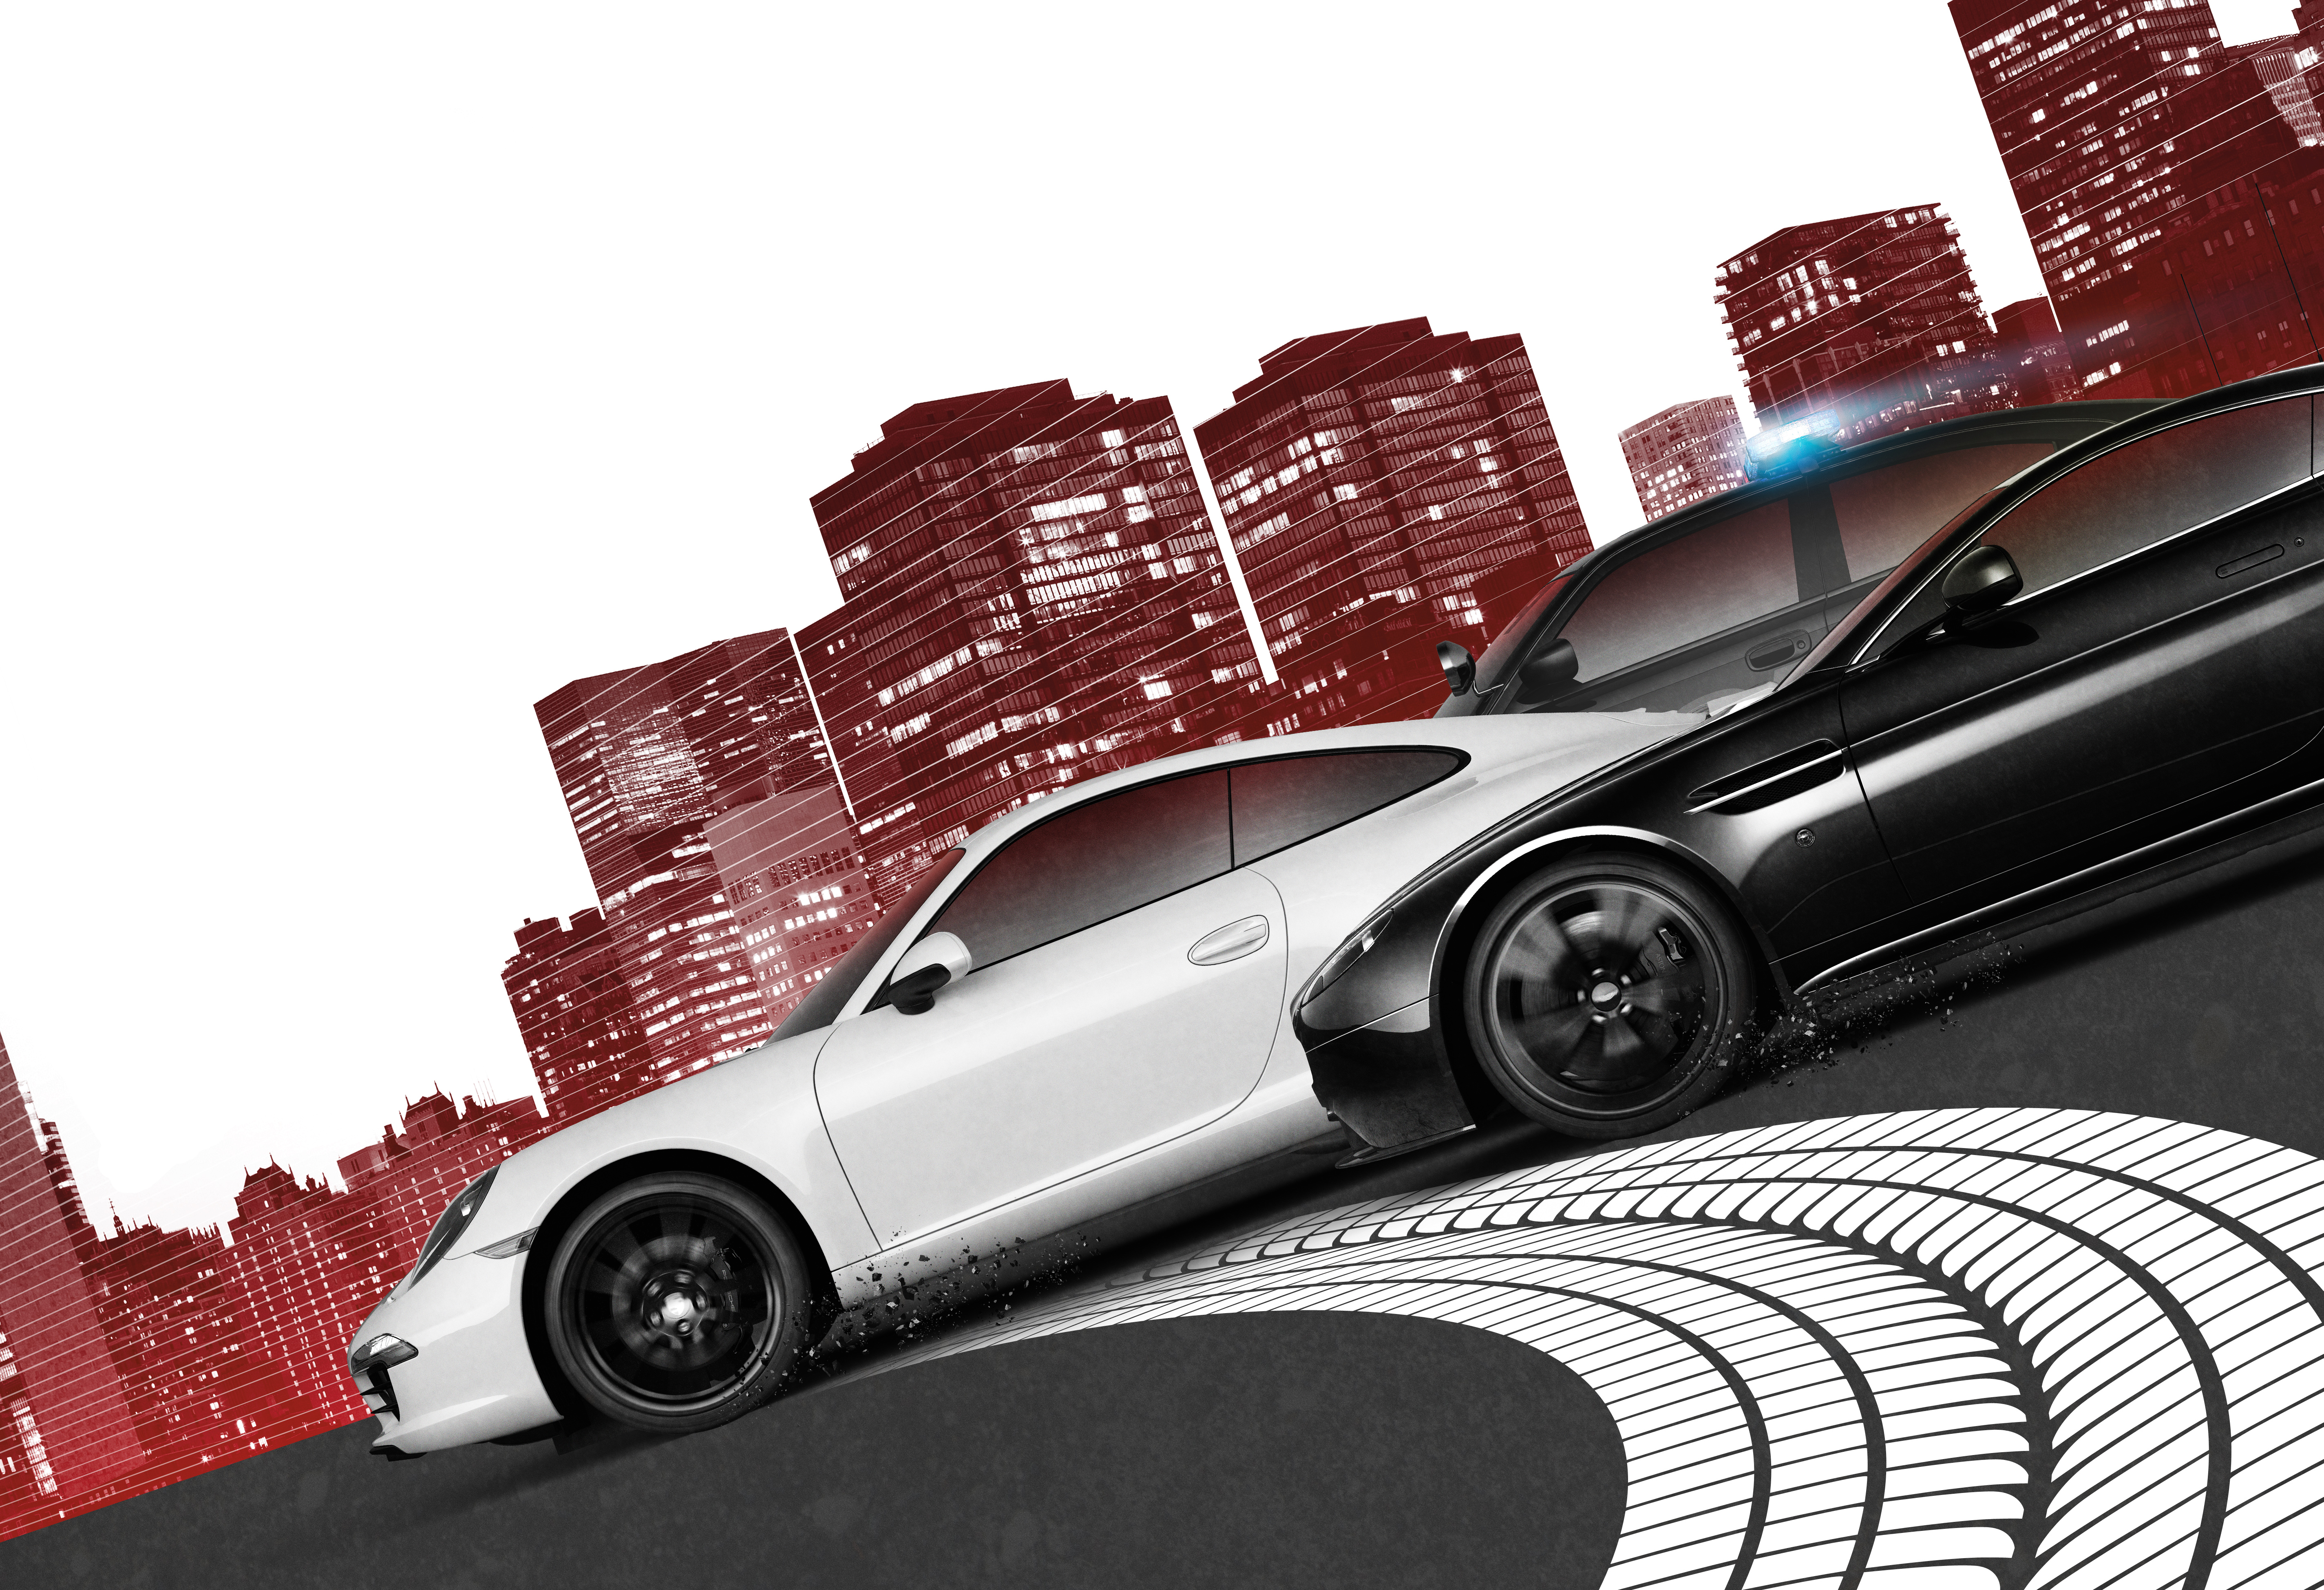 need for speed most wanted gratis